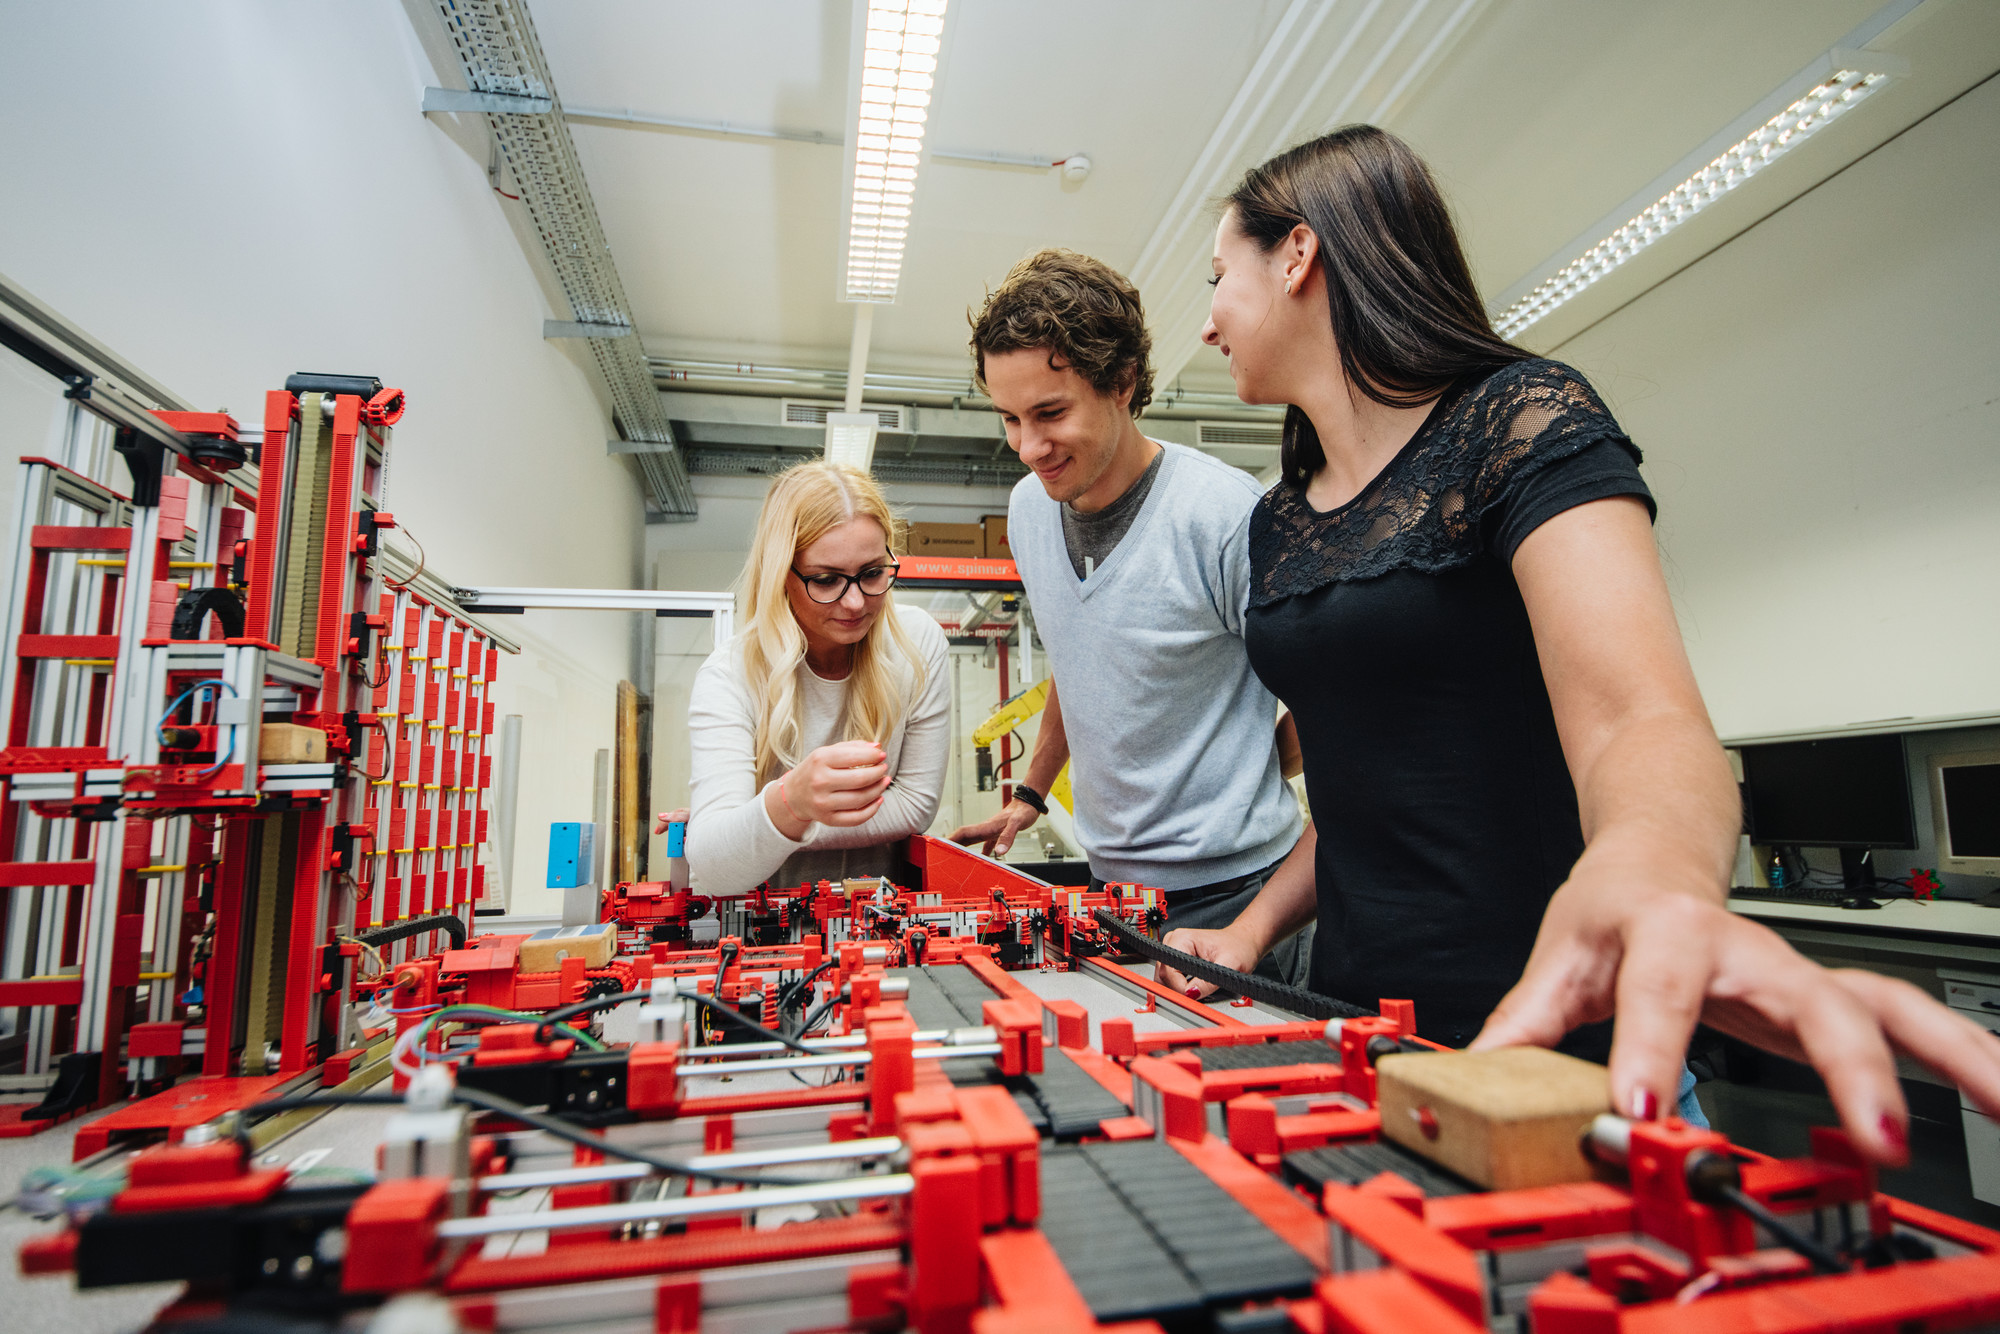 Students talk about their project work in the workshop at FH Villach campus